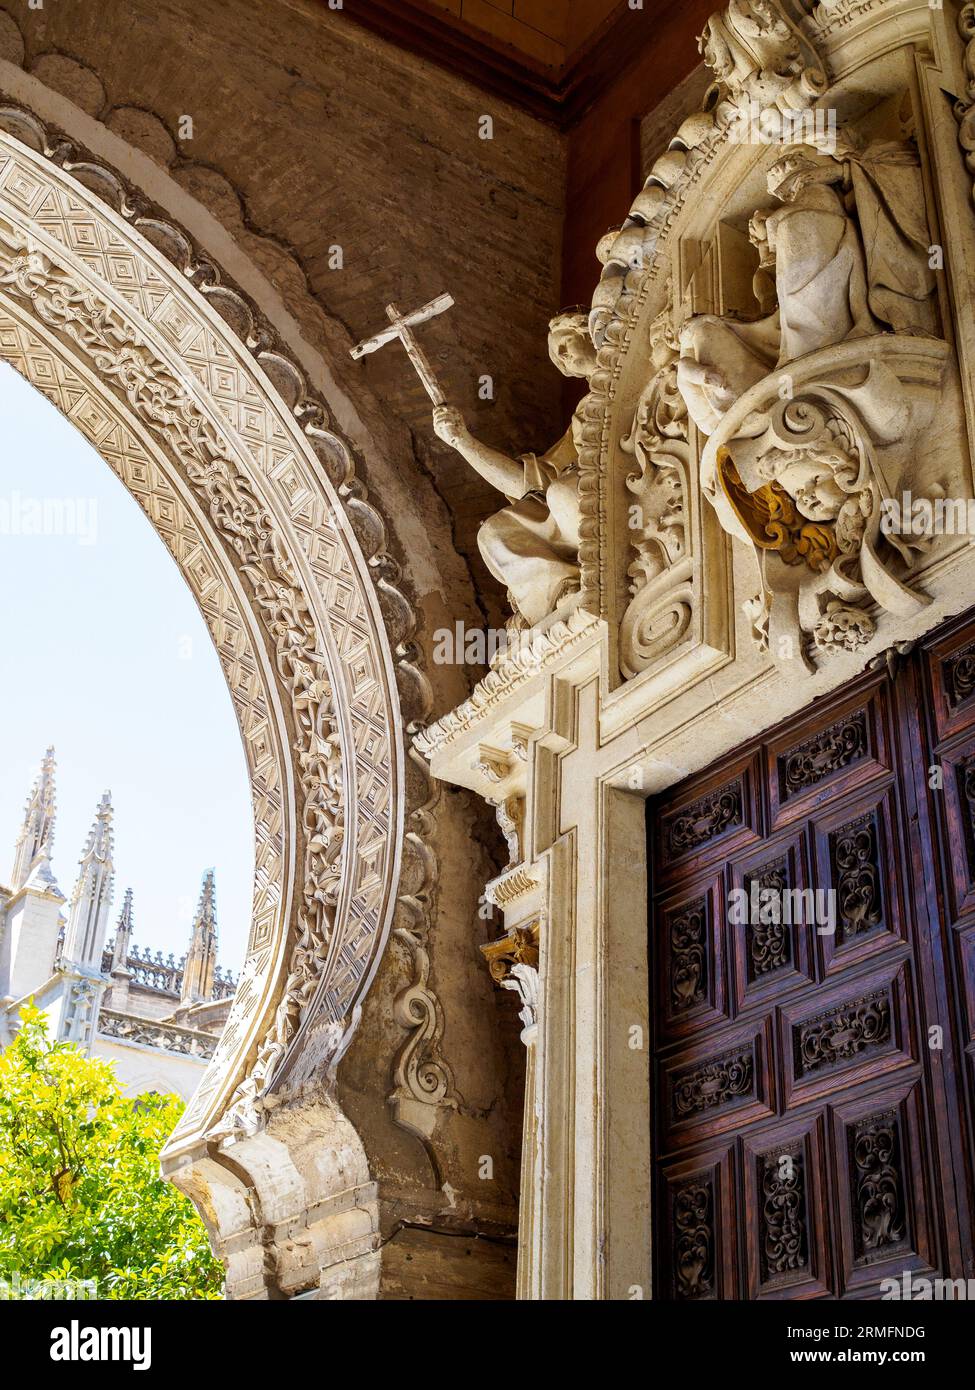 Puerta del Perdon gate, with the Patio de los naranjos courtyard in the background. North side of the Seville Cathedral. Seville, Andalusia, Spain. Stock Photo